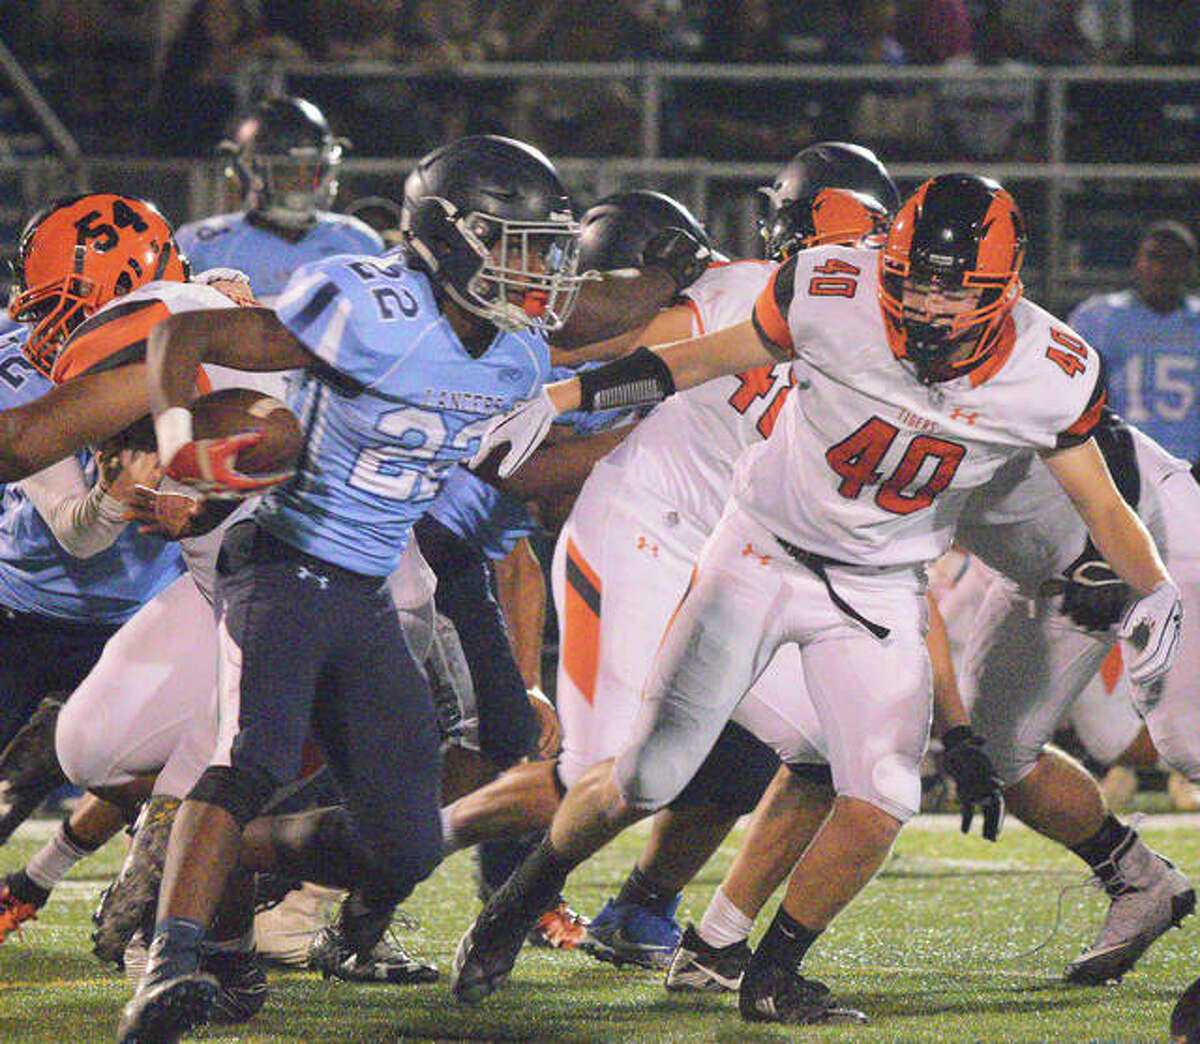 Edwardsville’s Adam Foster chases down the Belleville East running back during last Friday’s game in Belleville.